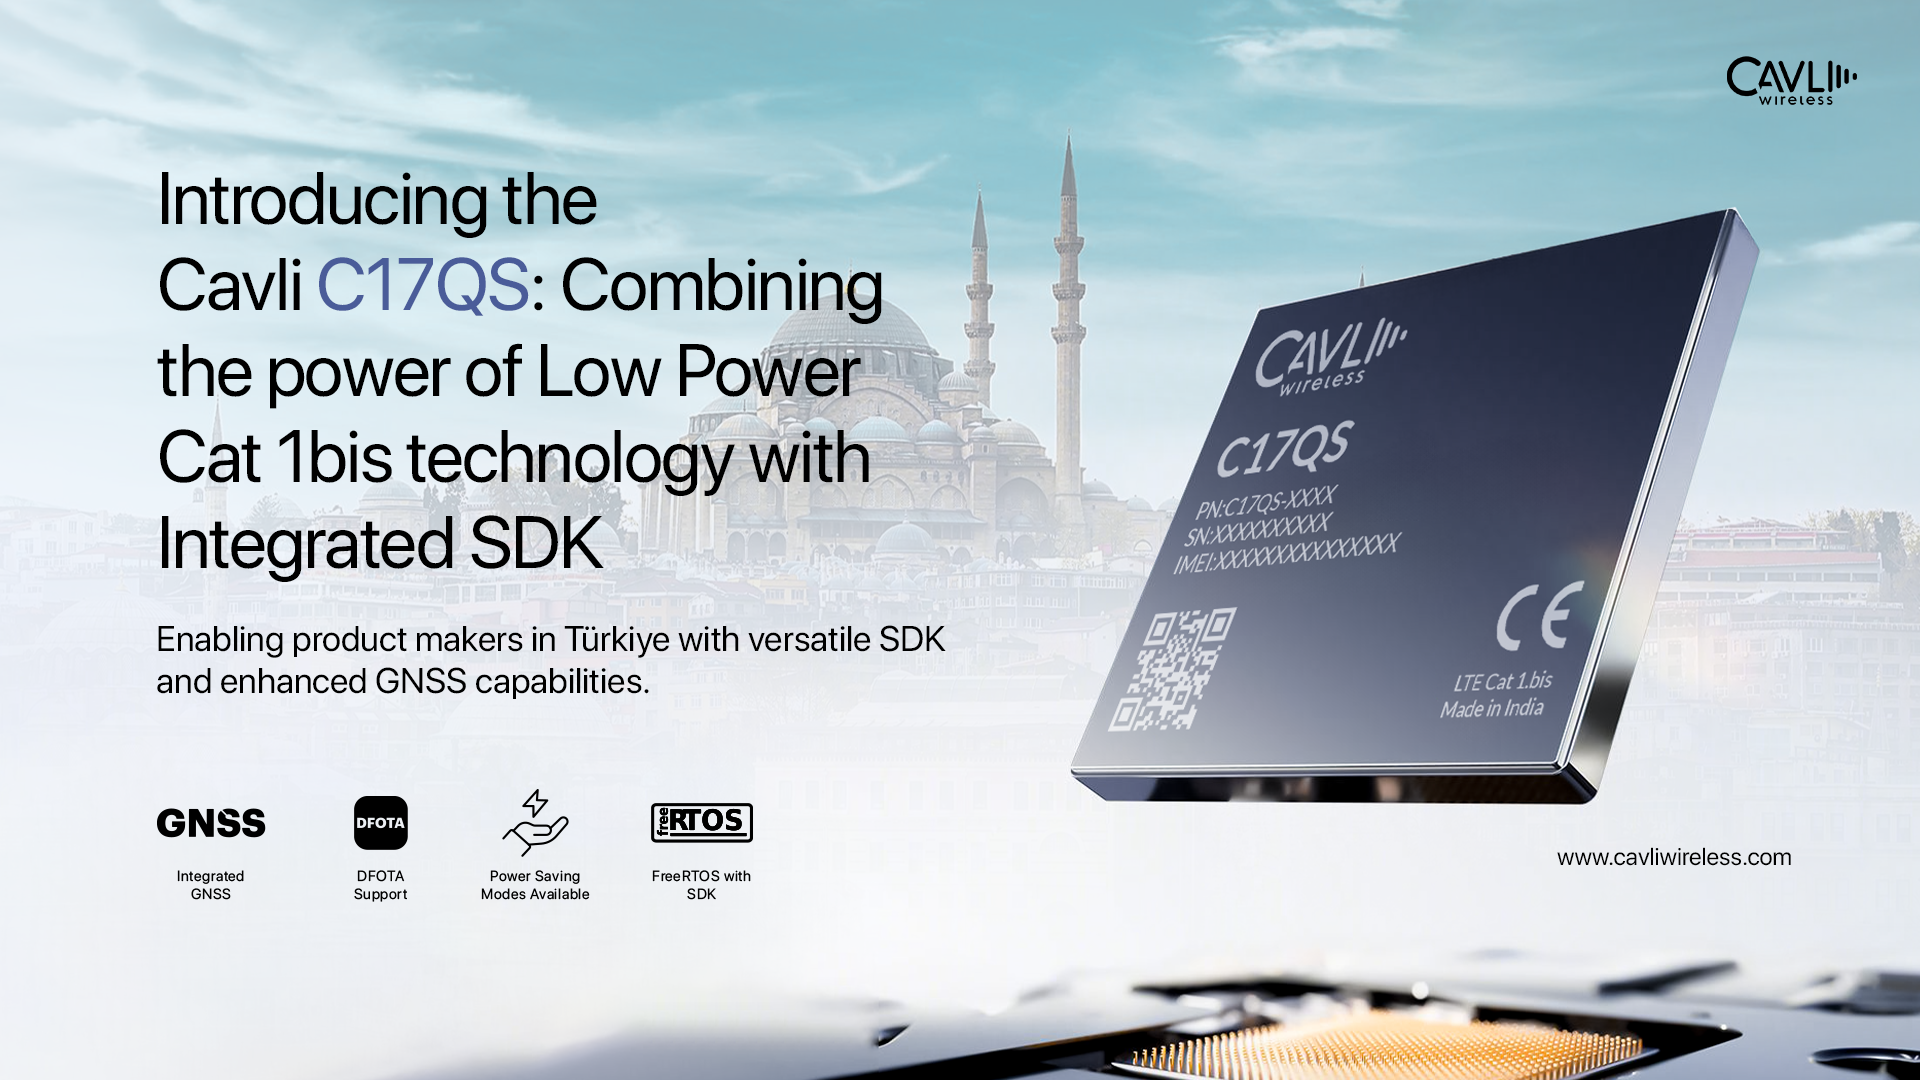 Cavli Wireless proudly announces the launch of the new C17QS Cat 1bis cellular IoT module in the Türkiye market.